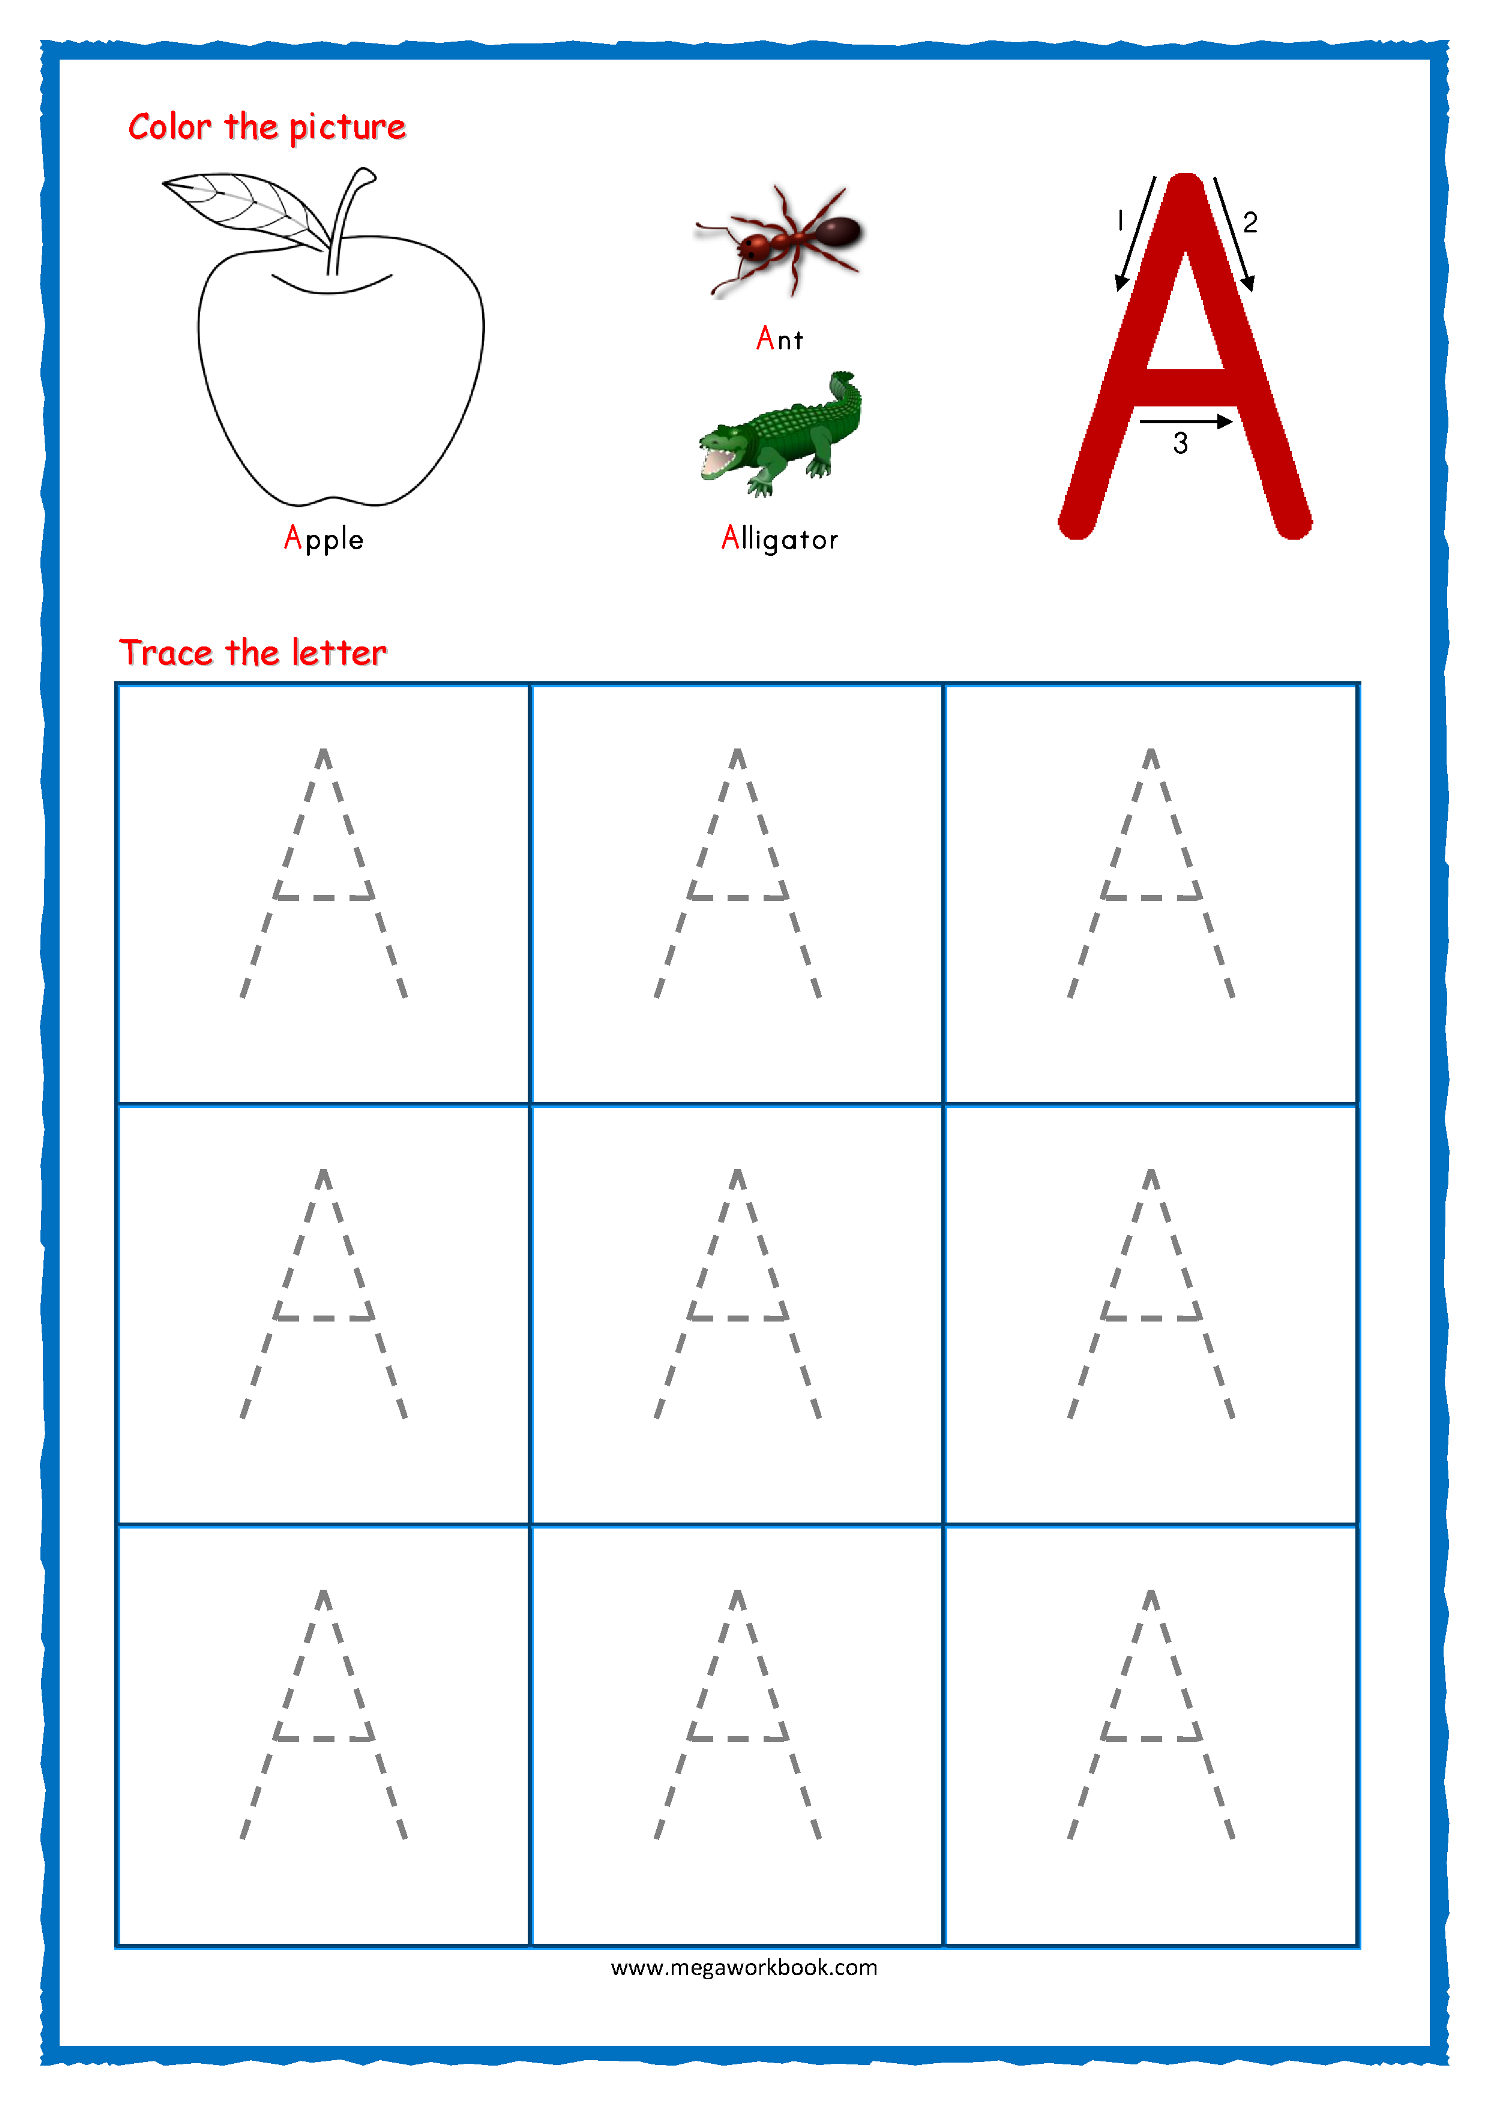 Coloring Book : Coloring Book Alphabet Tracing Worksheets within Letter A Tracing Worksheets